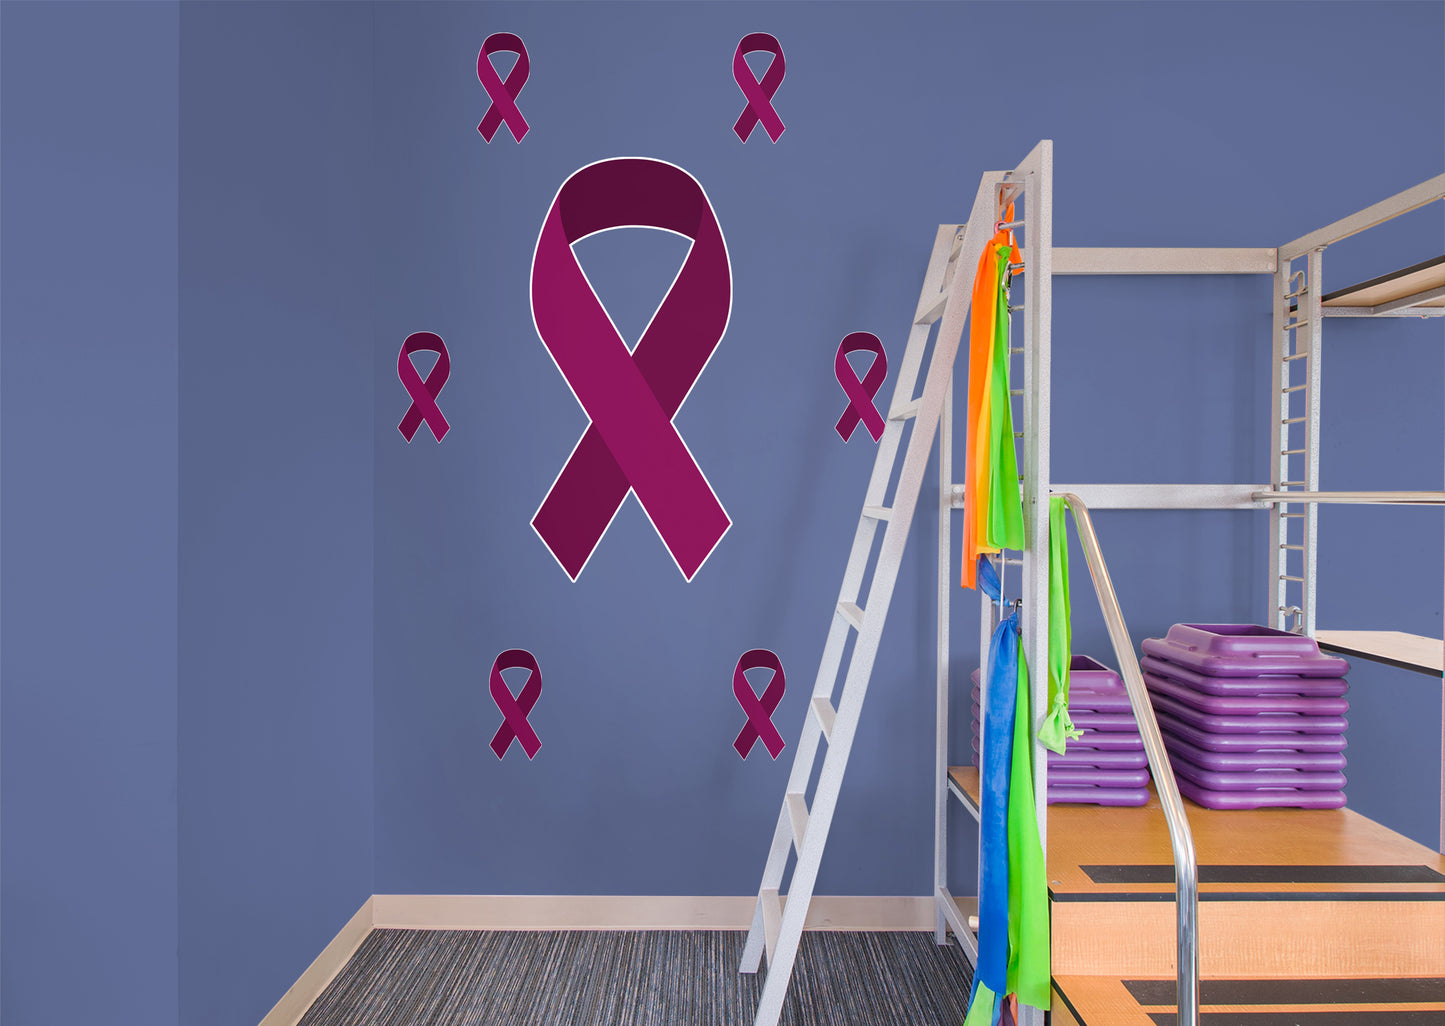 Giant Myeloma Cancer Ribbon  + 6 Decals (24"W x 51"H)